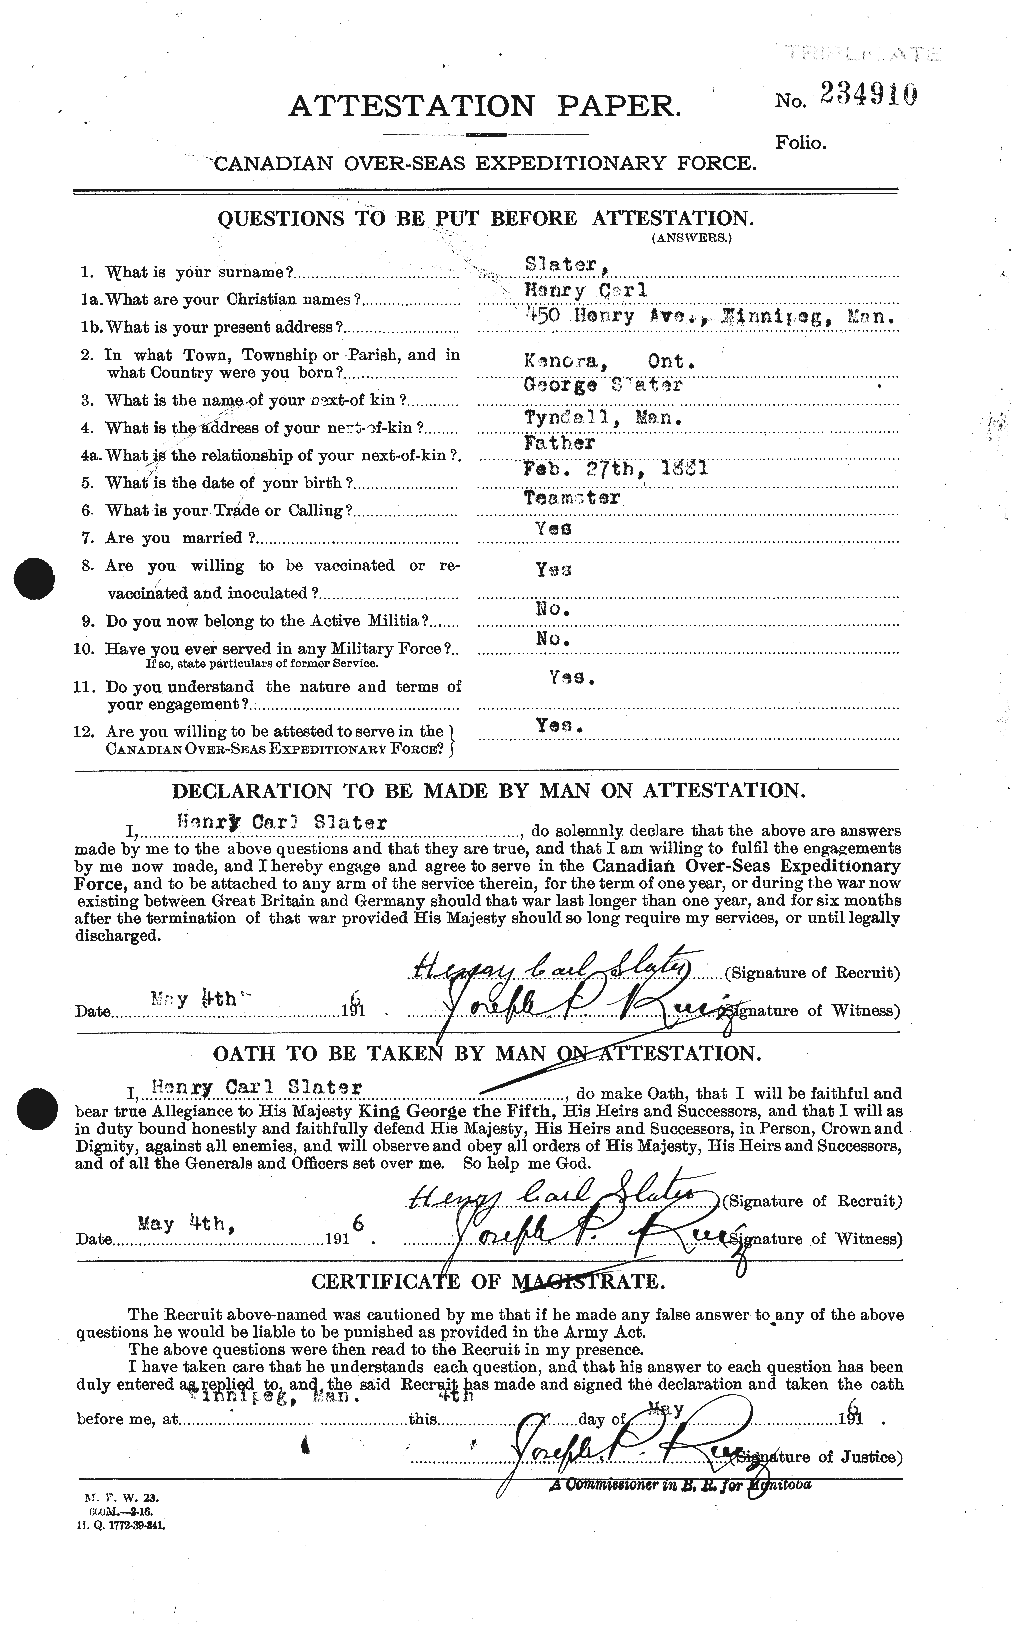 Personnel Records of the First World War - CEF 103050a